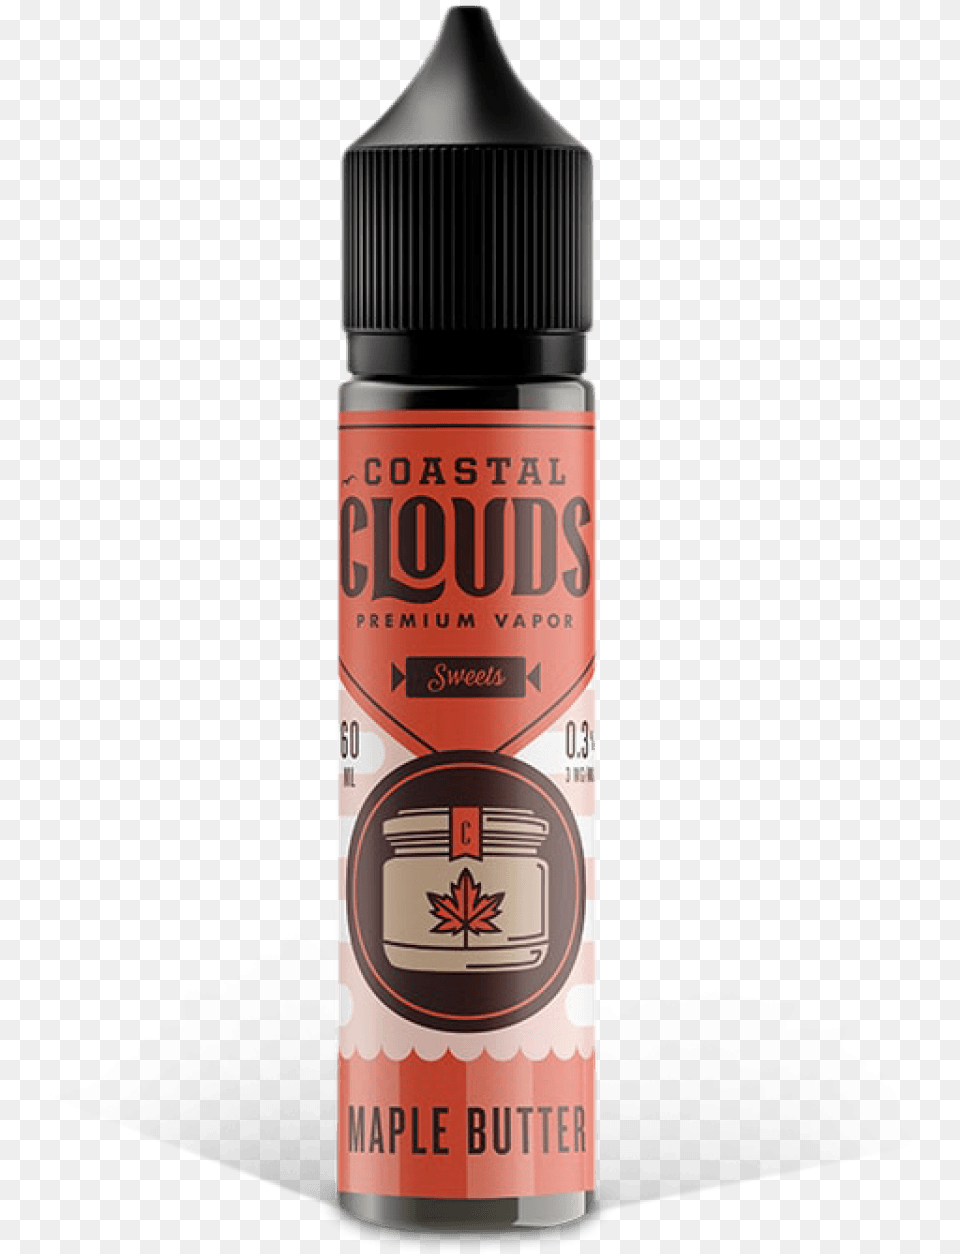 Coastal Clouds Maplebutter Juice Coastal Clouds Maple Butter, Can, Spray Can, Tin, Bottle Png Image